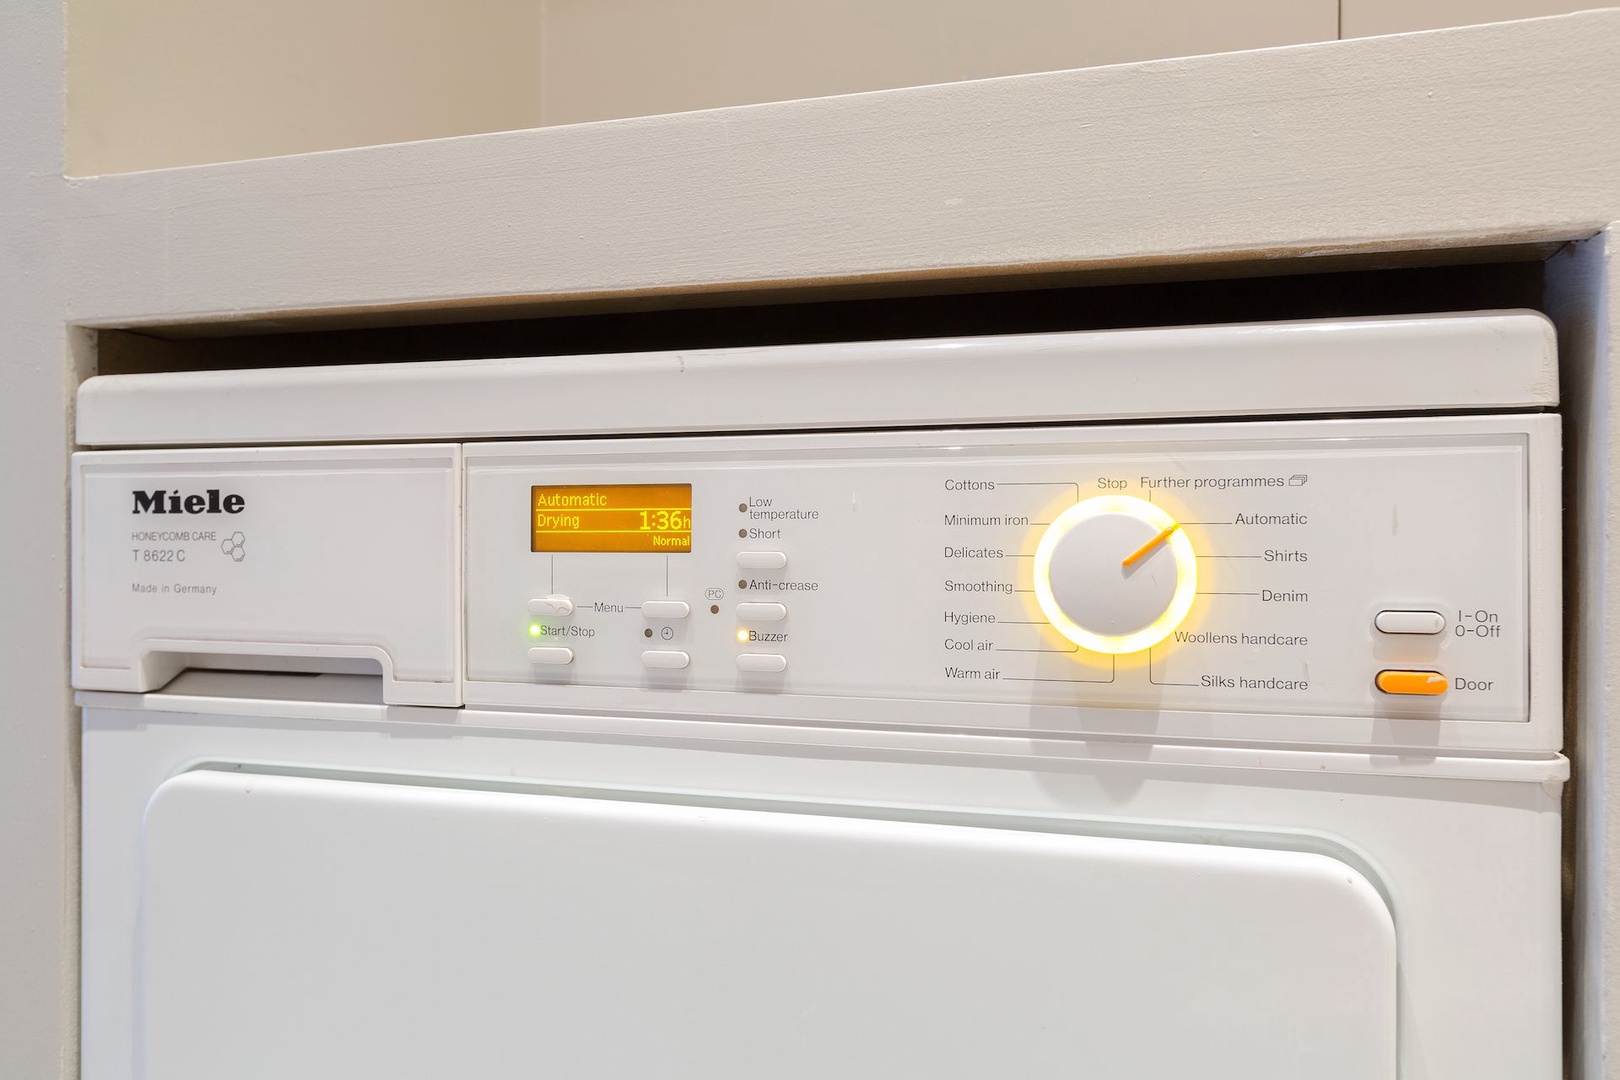 A washing machine makes longer stays more comfortable